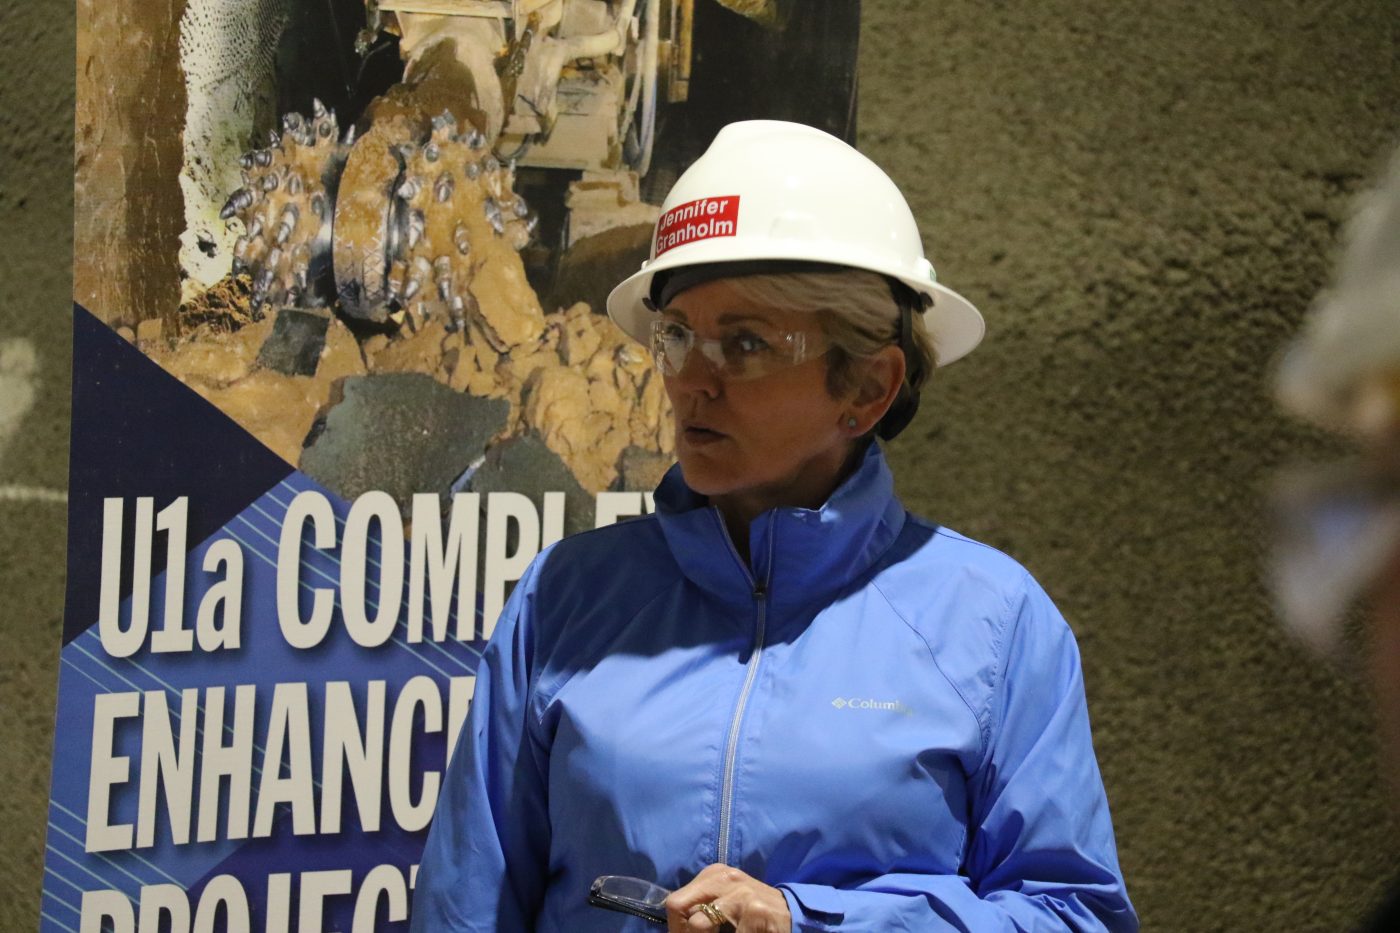 women in blue jacket and white hard hat with a red sticker on it in front of U1a Complex Enhancement Project banner